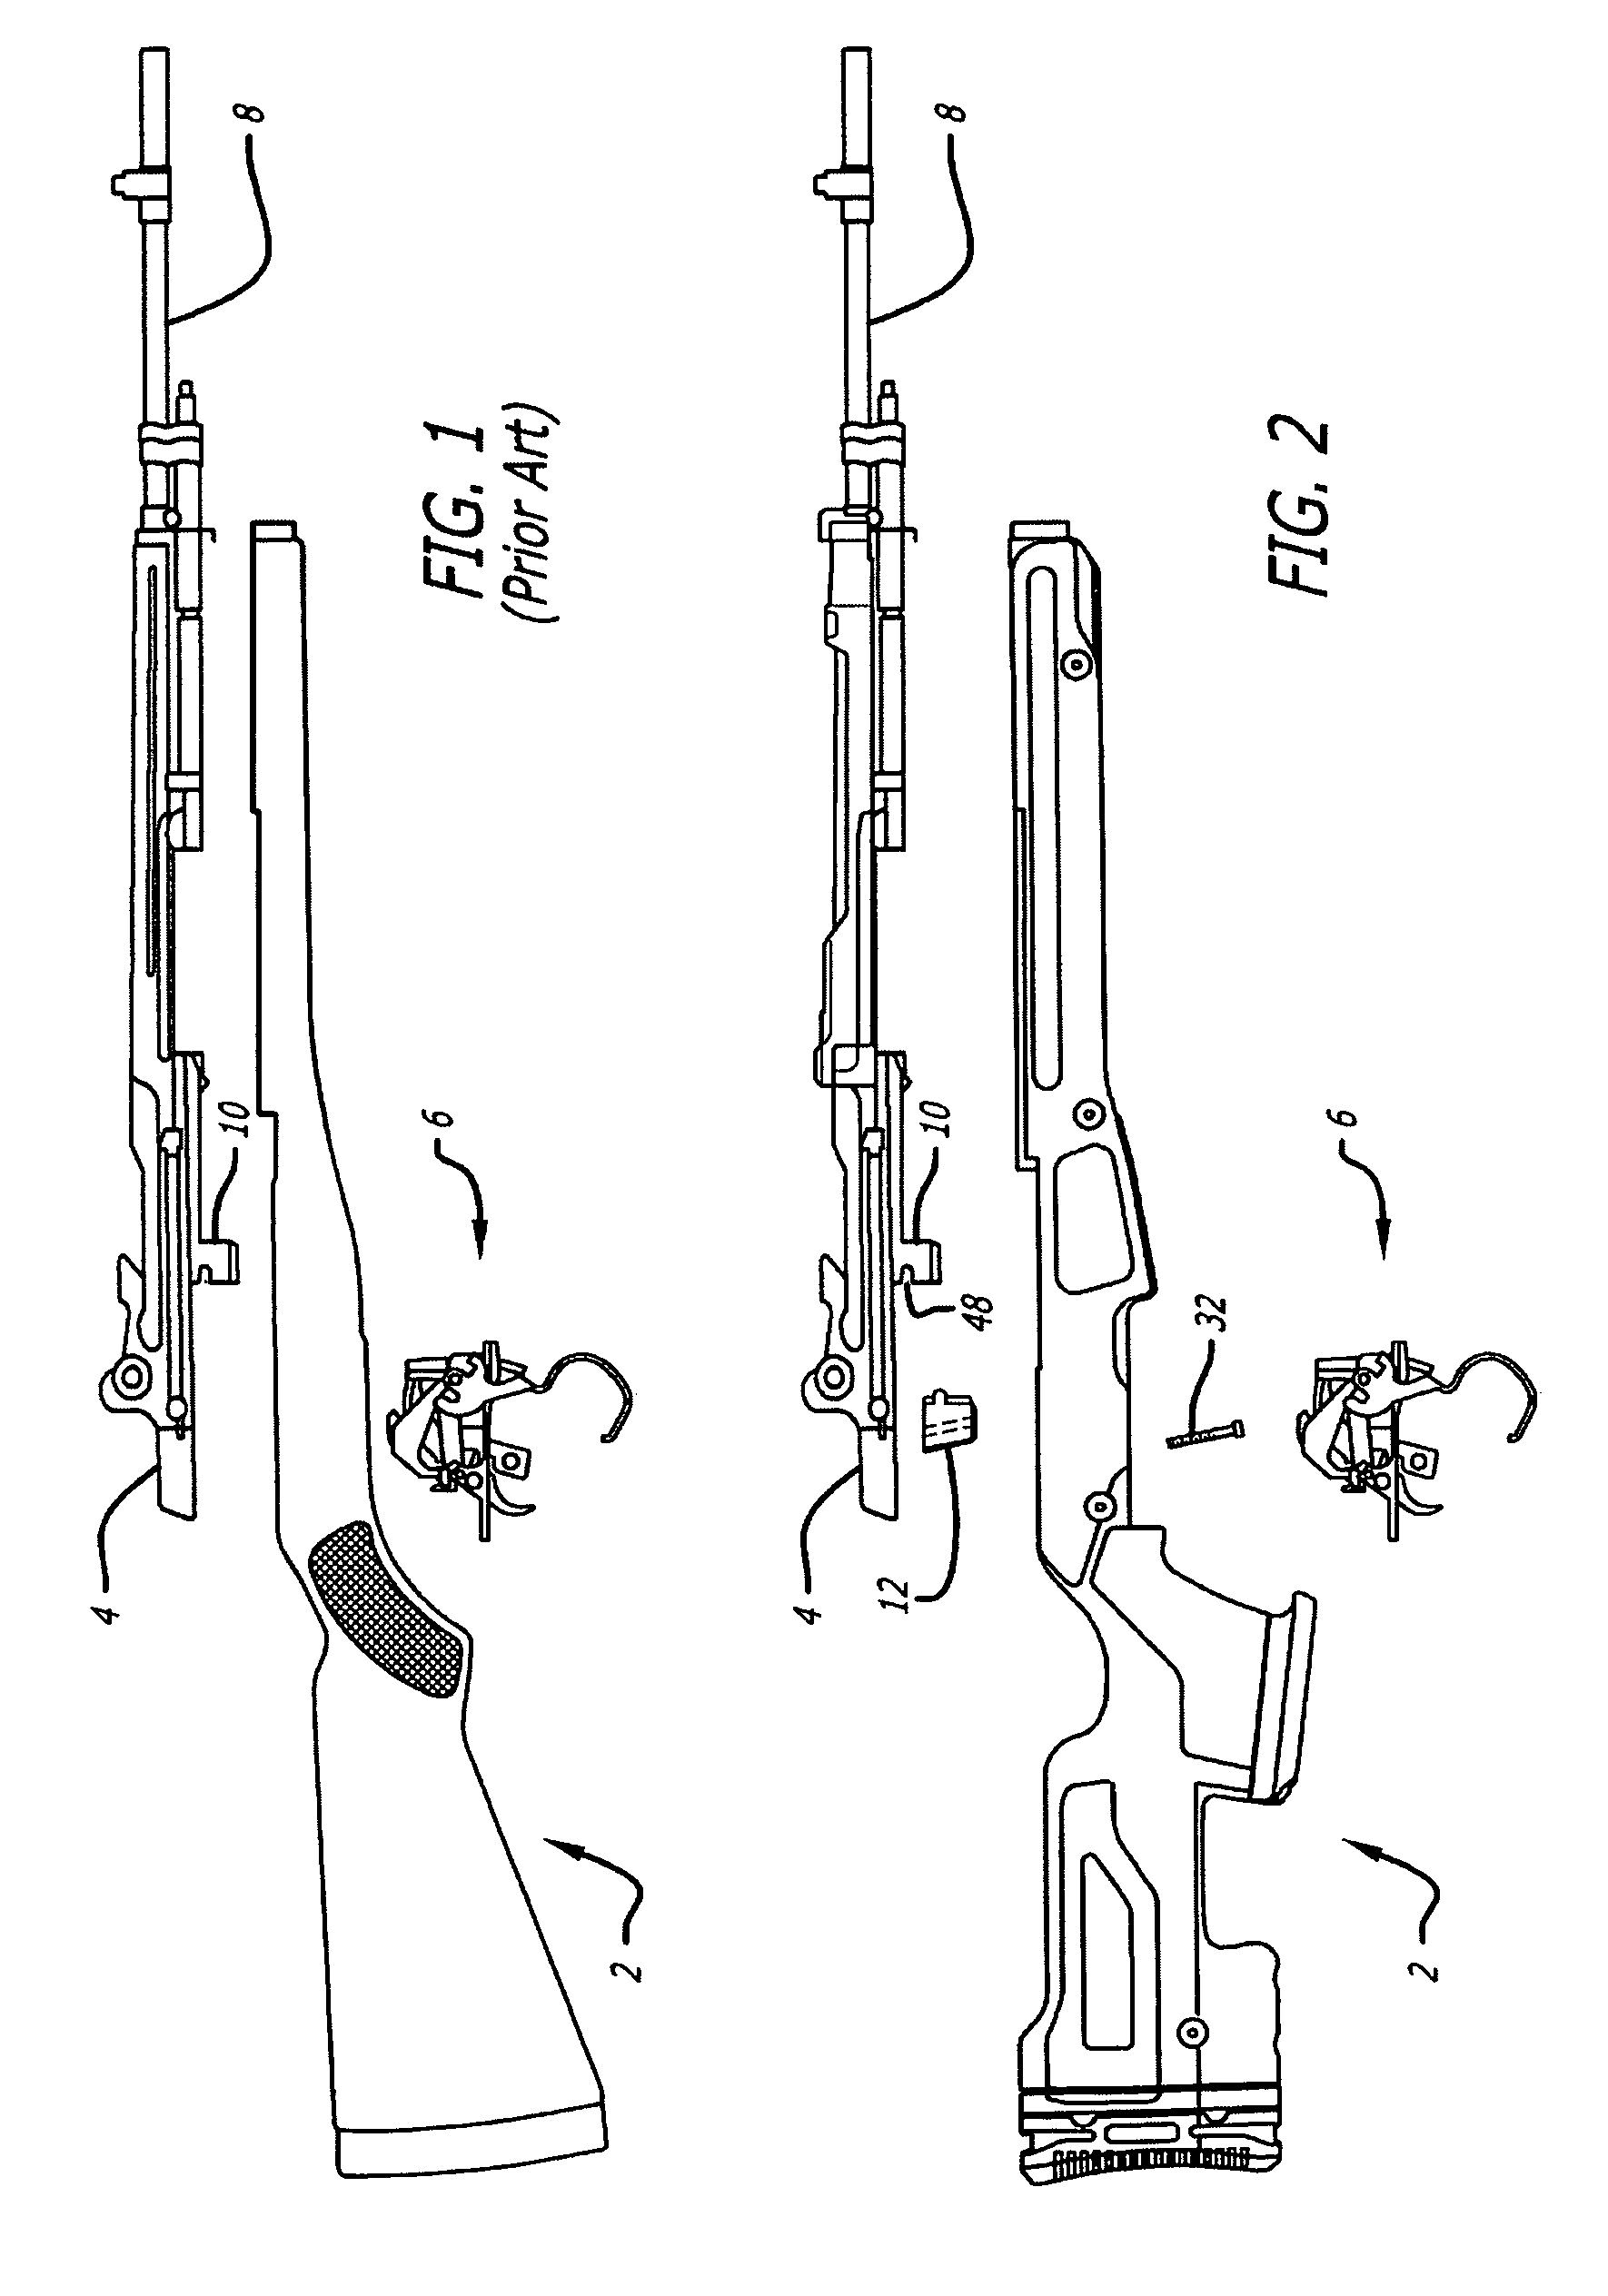 Firearm fastening assembly and method of use